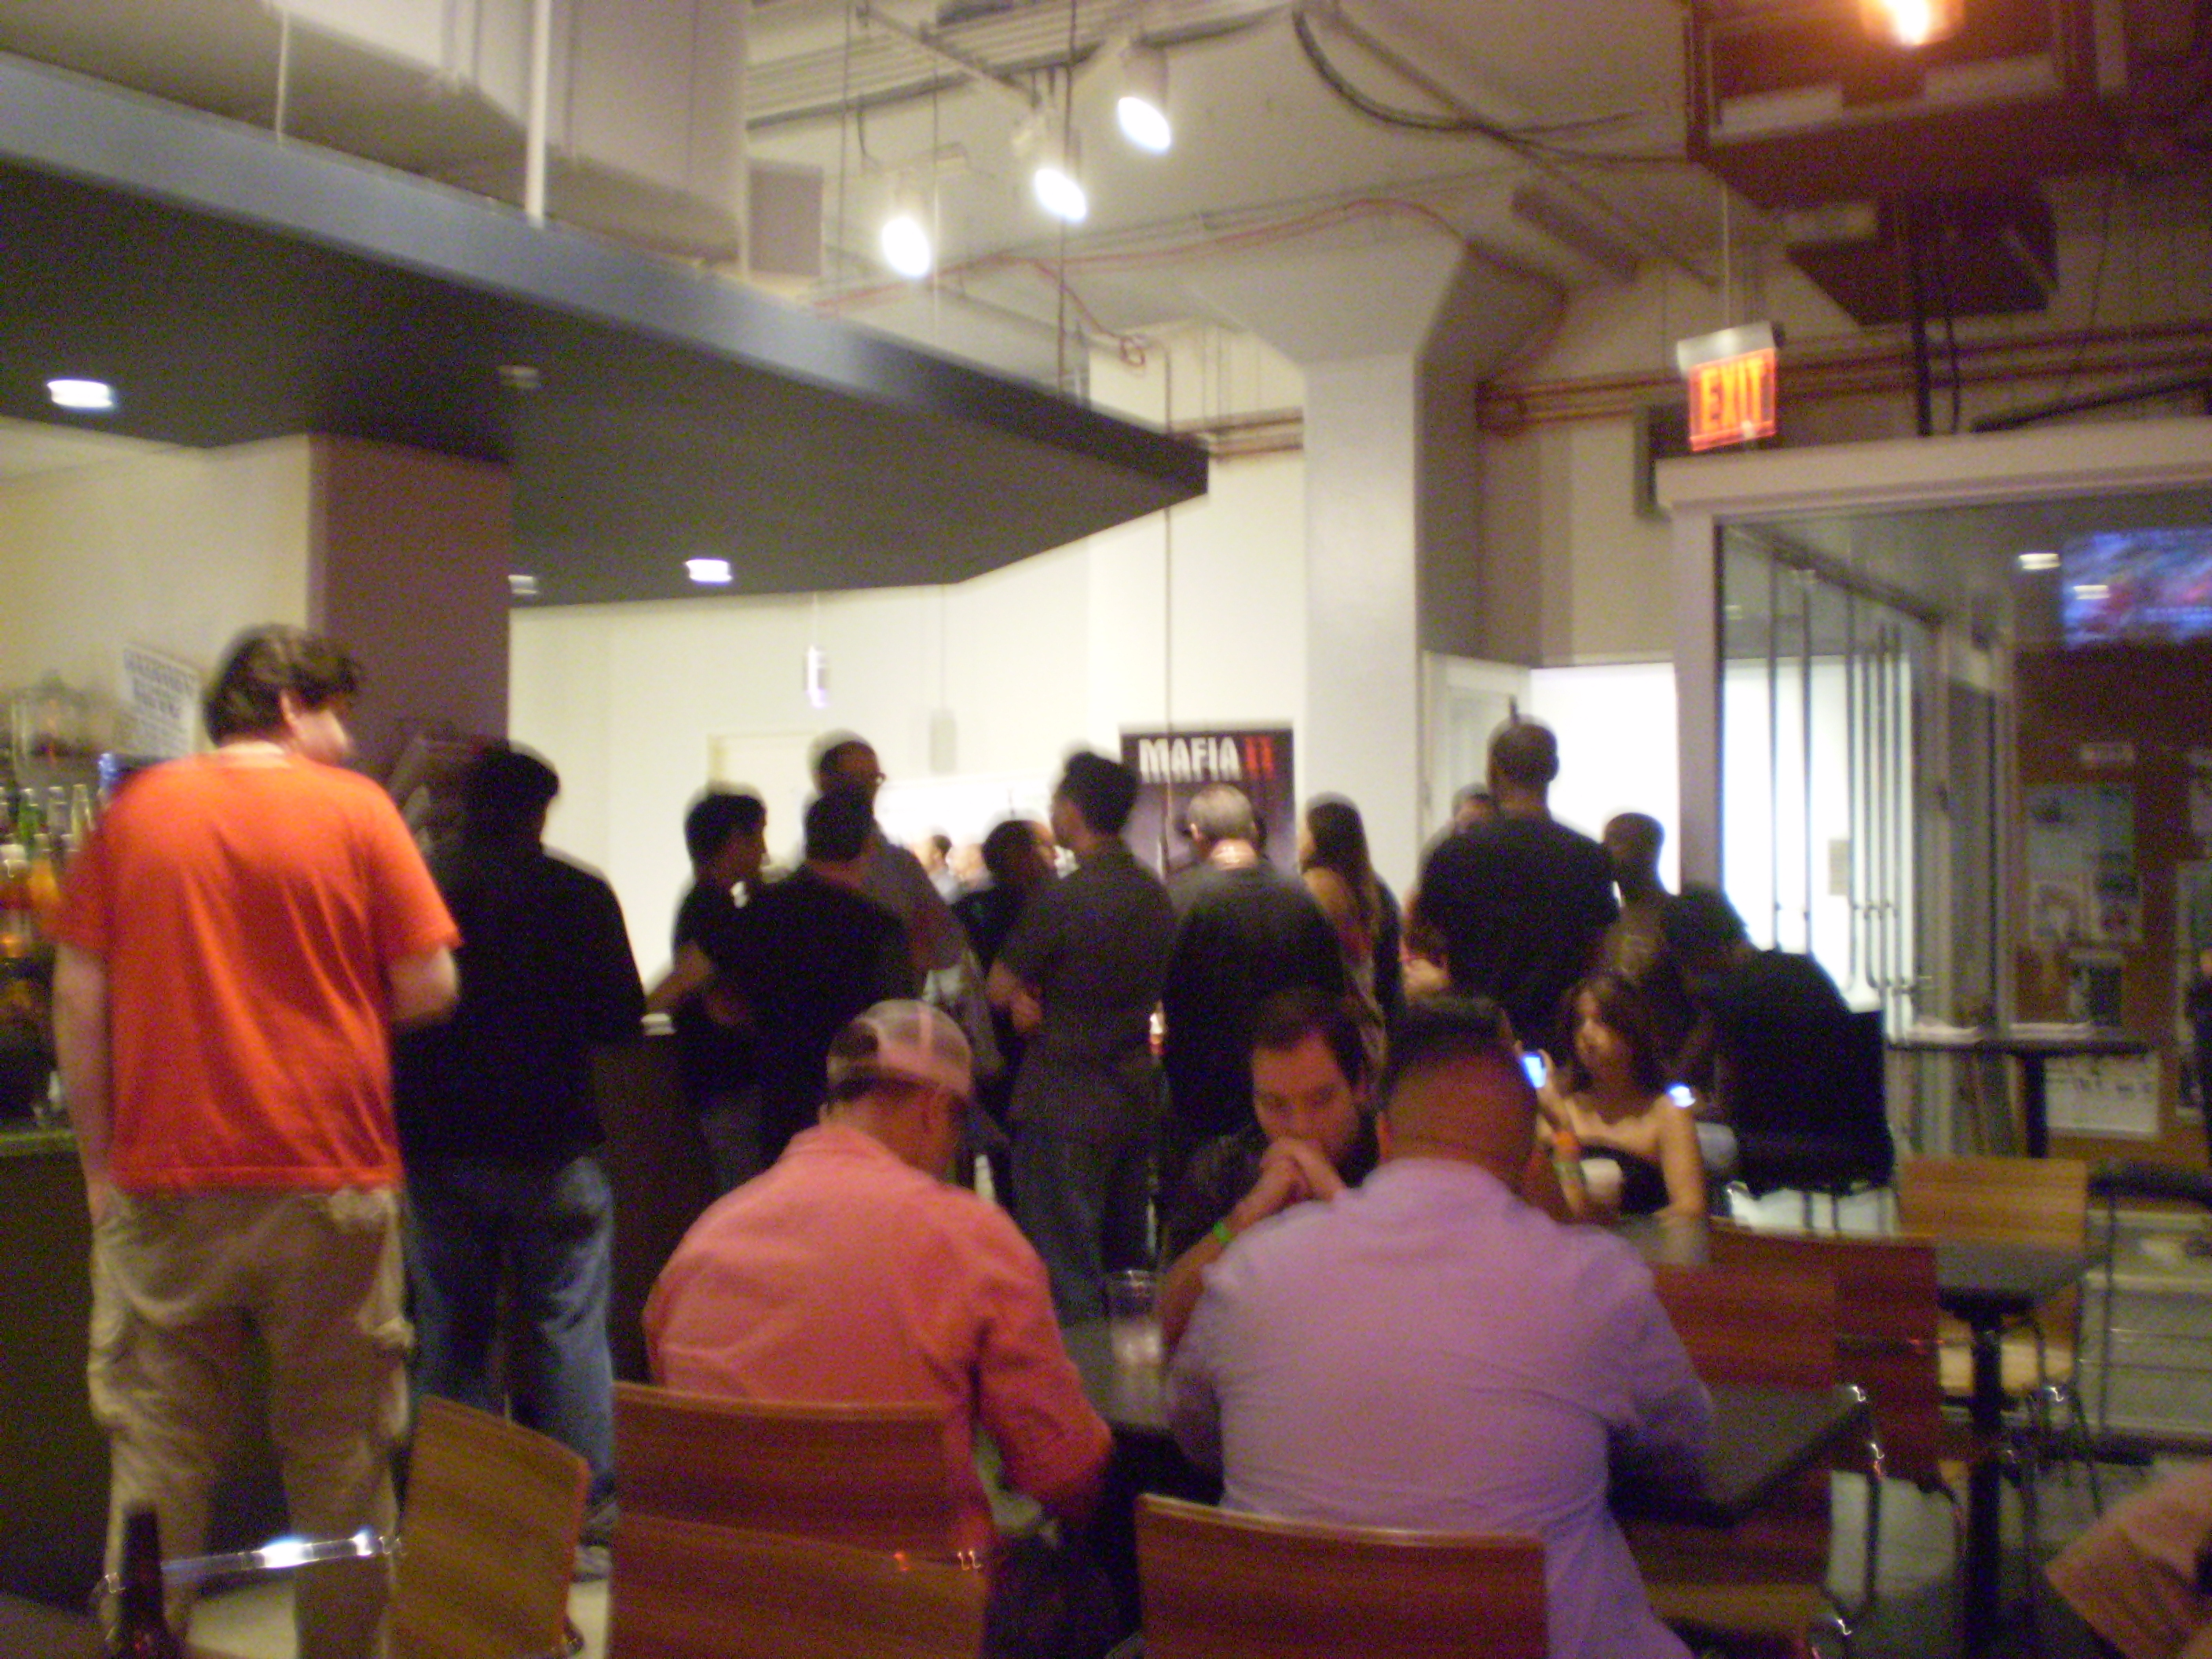 Attendees anxiously await the start of the party.